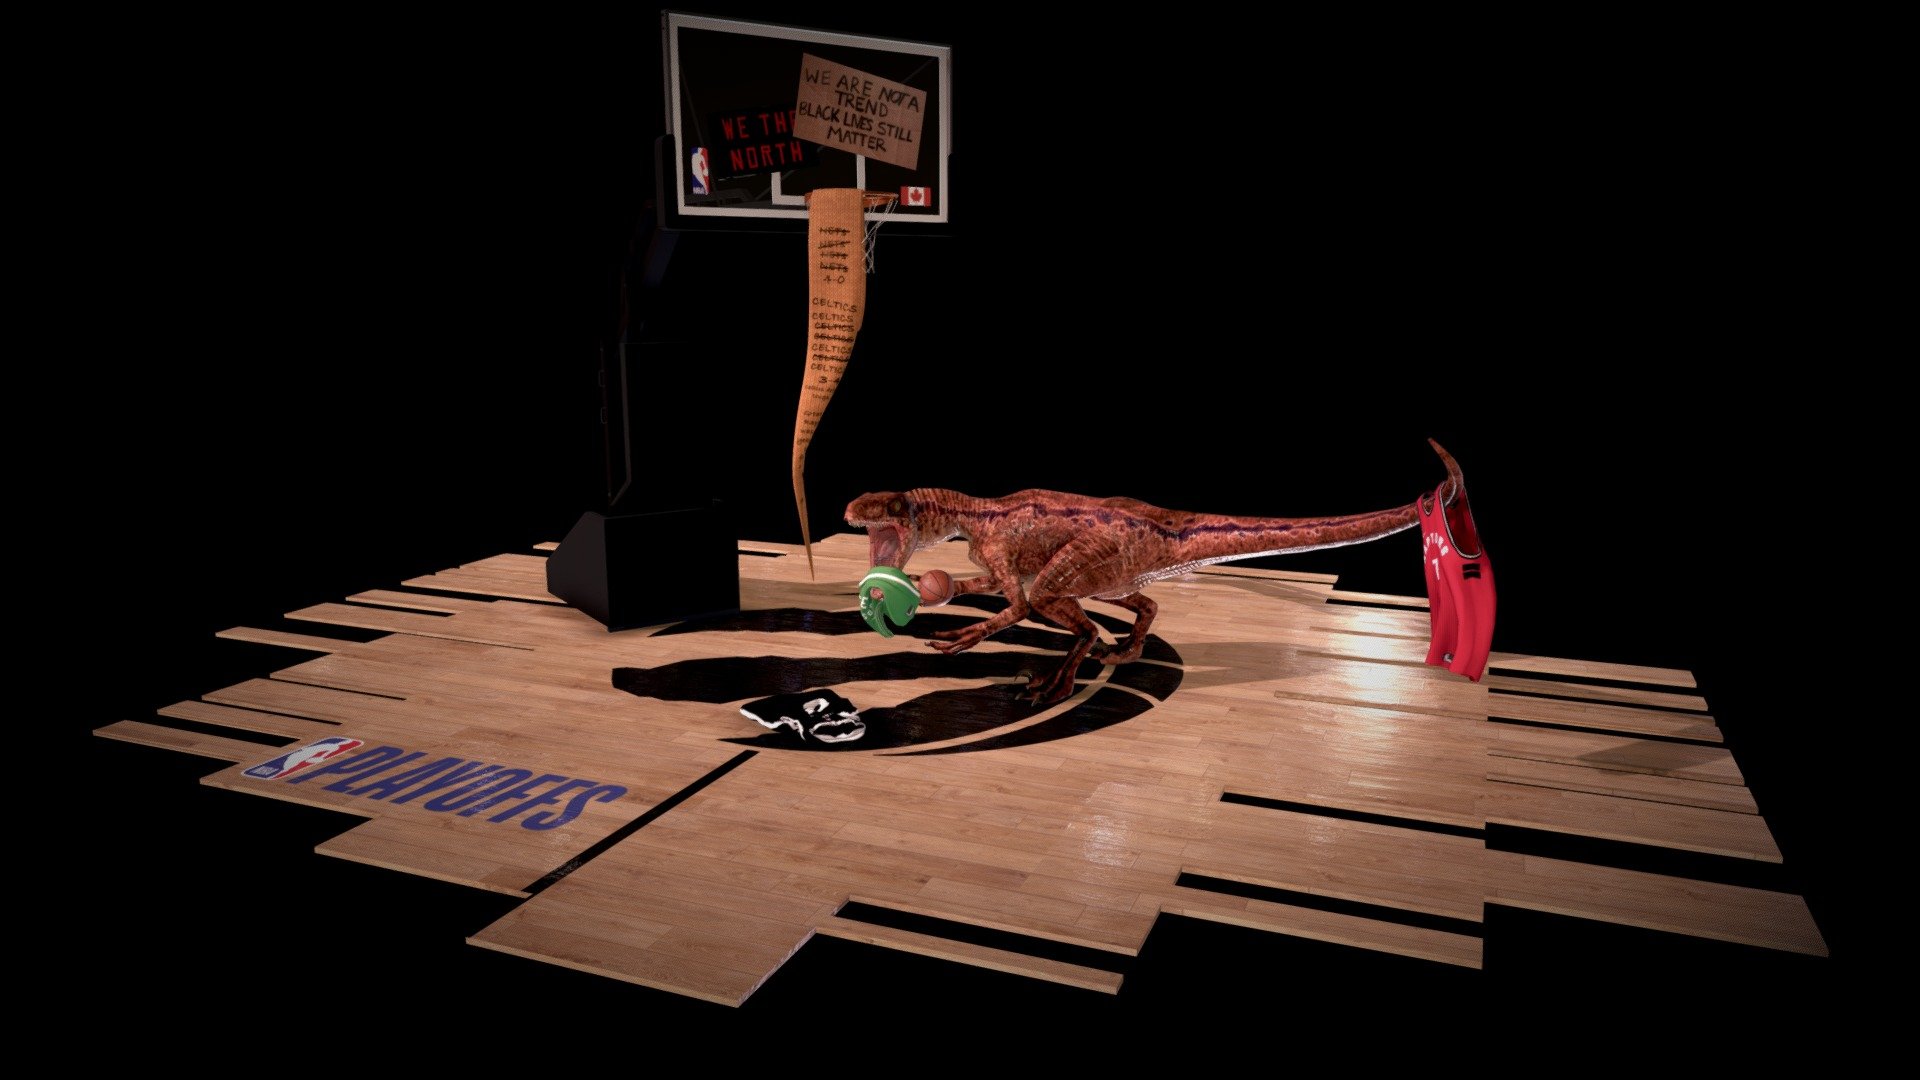 A passion project to explore different 3D tools, and to commemorate the stellar season and ongoing playoffs of the the Toronto Raptors, in addition to the Black Lives Matter social justice issues that weigh heavily on the participants in the NBA season. I will update the model as the playoffs continue (watch the recreation of Serge Ibaka's scarf hanging on the rim and the jerseys on the floor as they progress ;)

Credits follow:


Raptor rig from 3D artist Truong.
Basketball hoop from Studio lab
Jerseys modelled and textured
Court and scarf modelled and textured.
Note that I made many modifications to the textures and geometry of all models for a complete visual look, and to increase performance. Fiddled with Sketchfab's spectacular 3D settings to get the right look.

Built using Autodesk Maya and Adobe Photoshop - The Toronto Raptors in the 2020 NBA Playoffs - 3D model by PlumCantaloupe 3d model